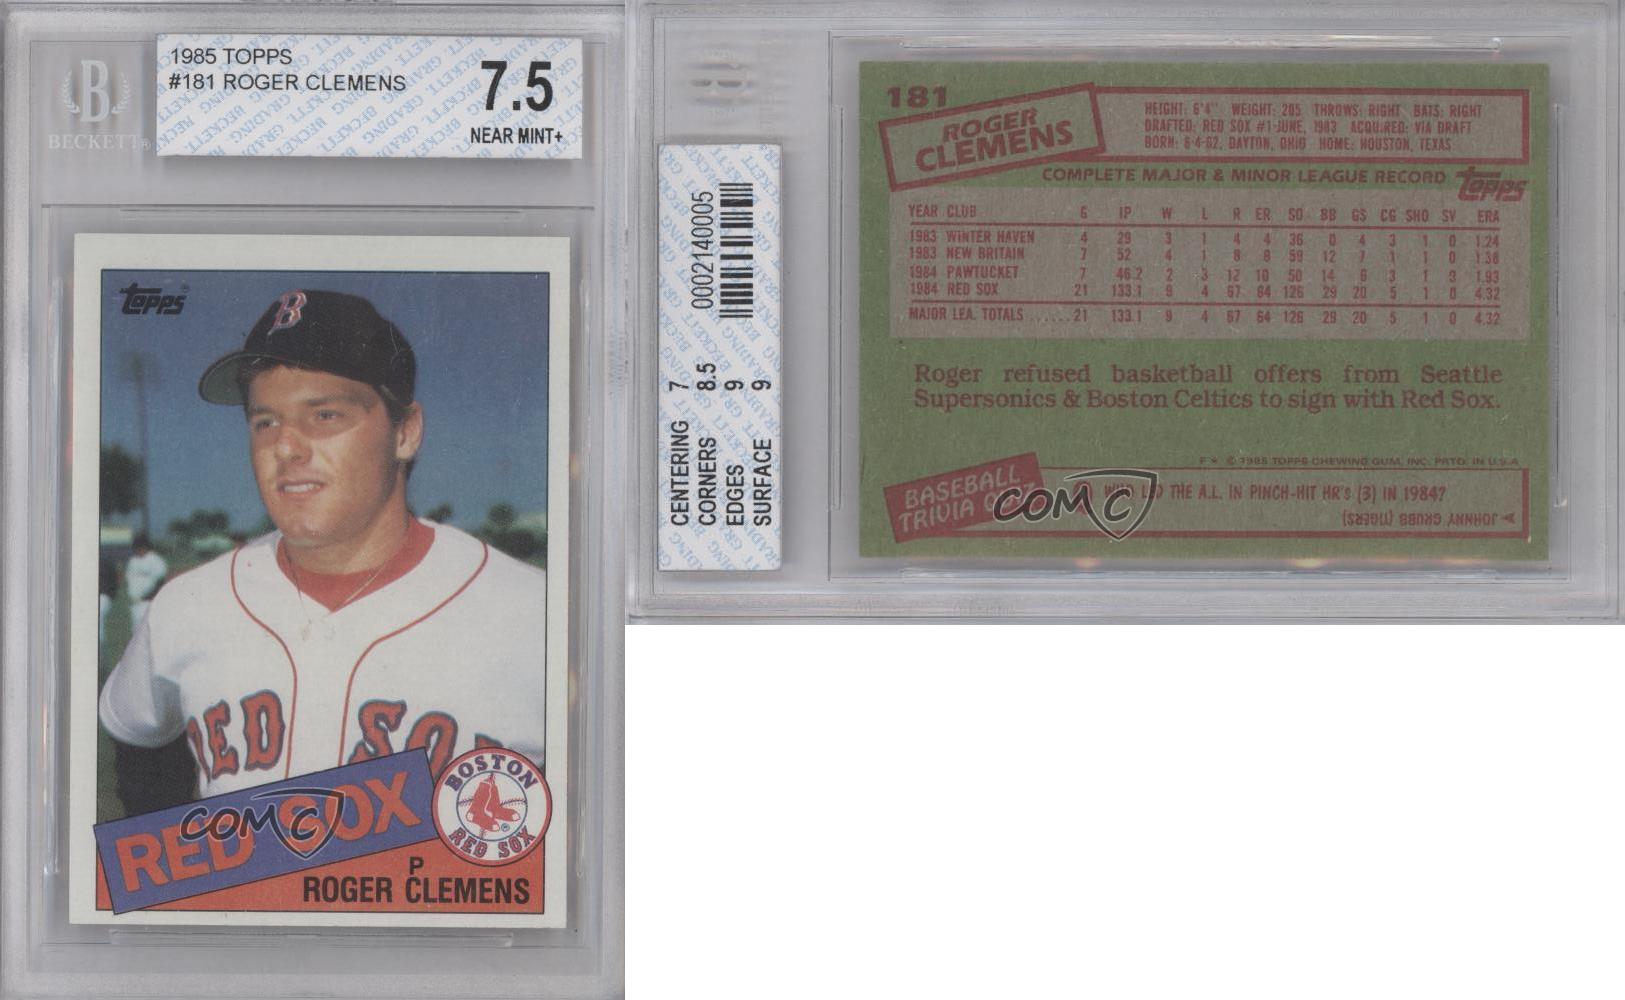  1985 Topps Baseball #181 Roger Clemens Rookie Card :  Collectibles & Fine Art